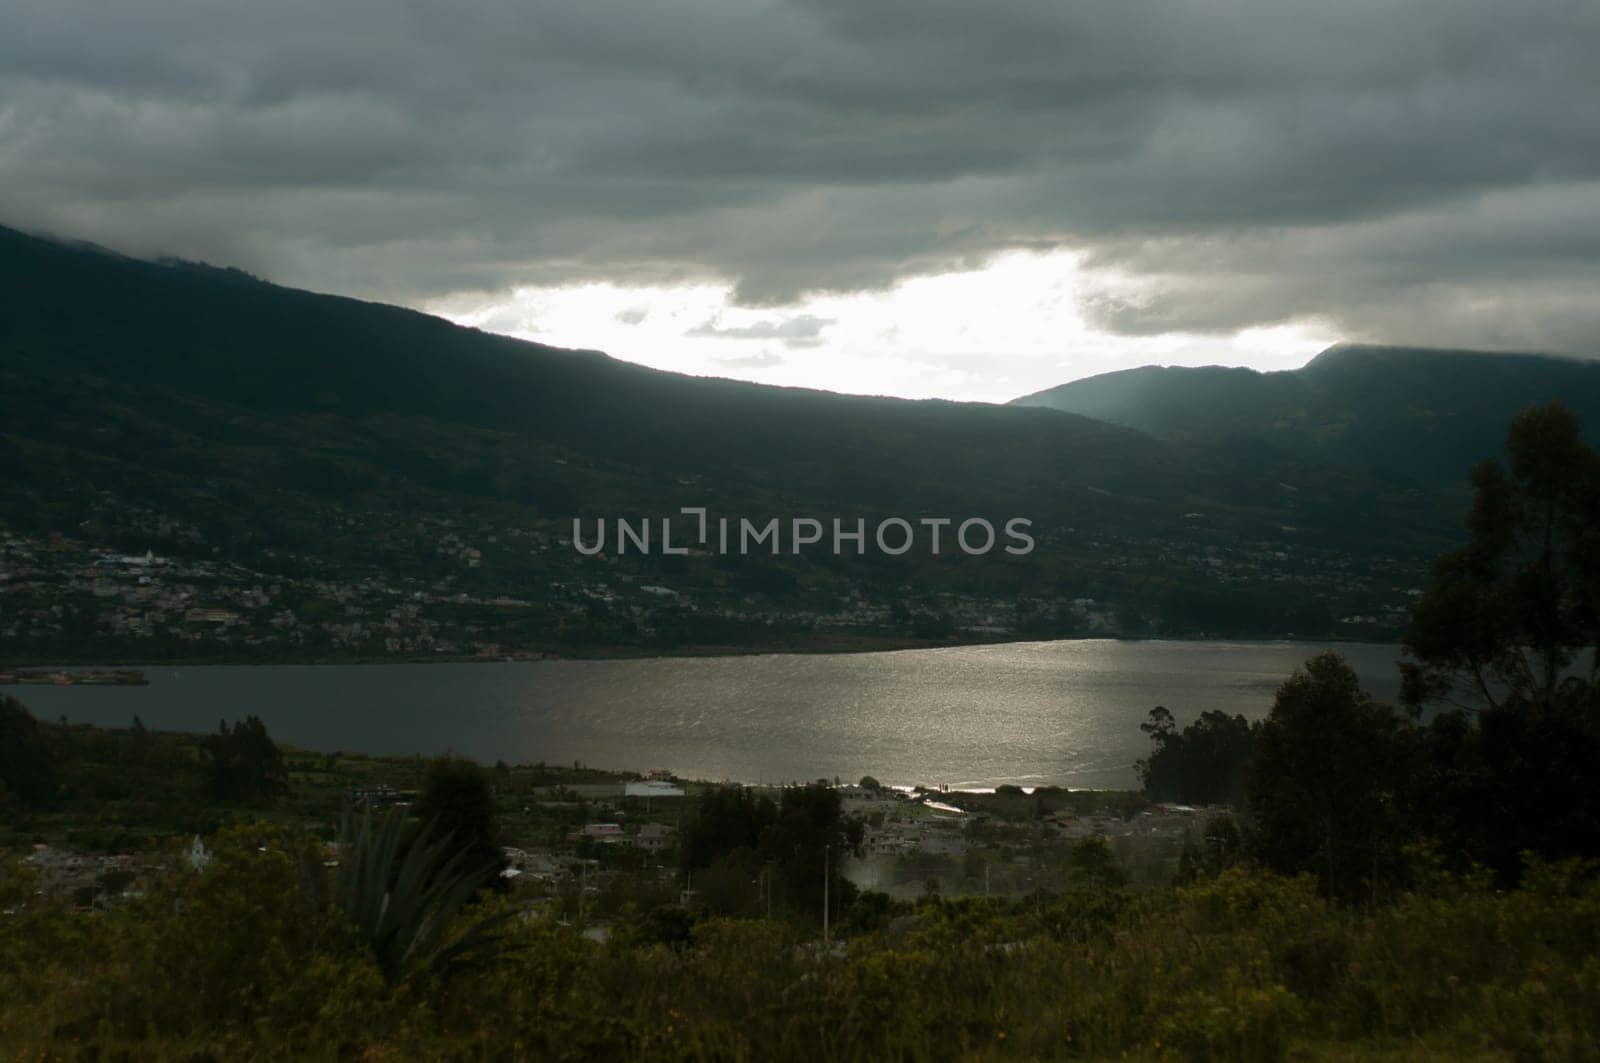 A View of Lake San Pablo and the Andes Mountains in Ecuador by Raulmartin